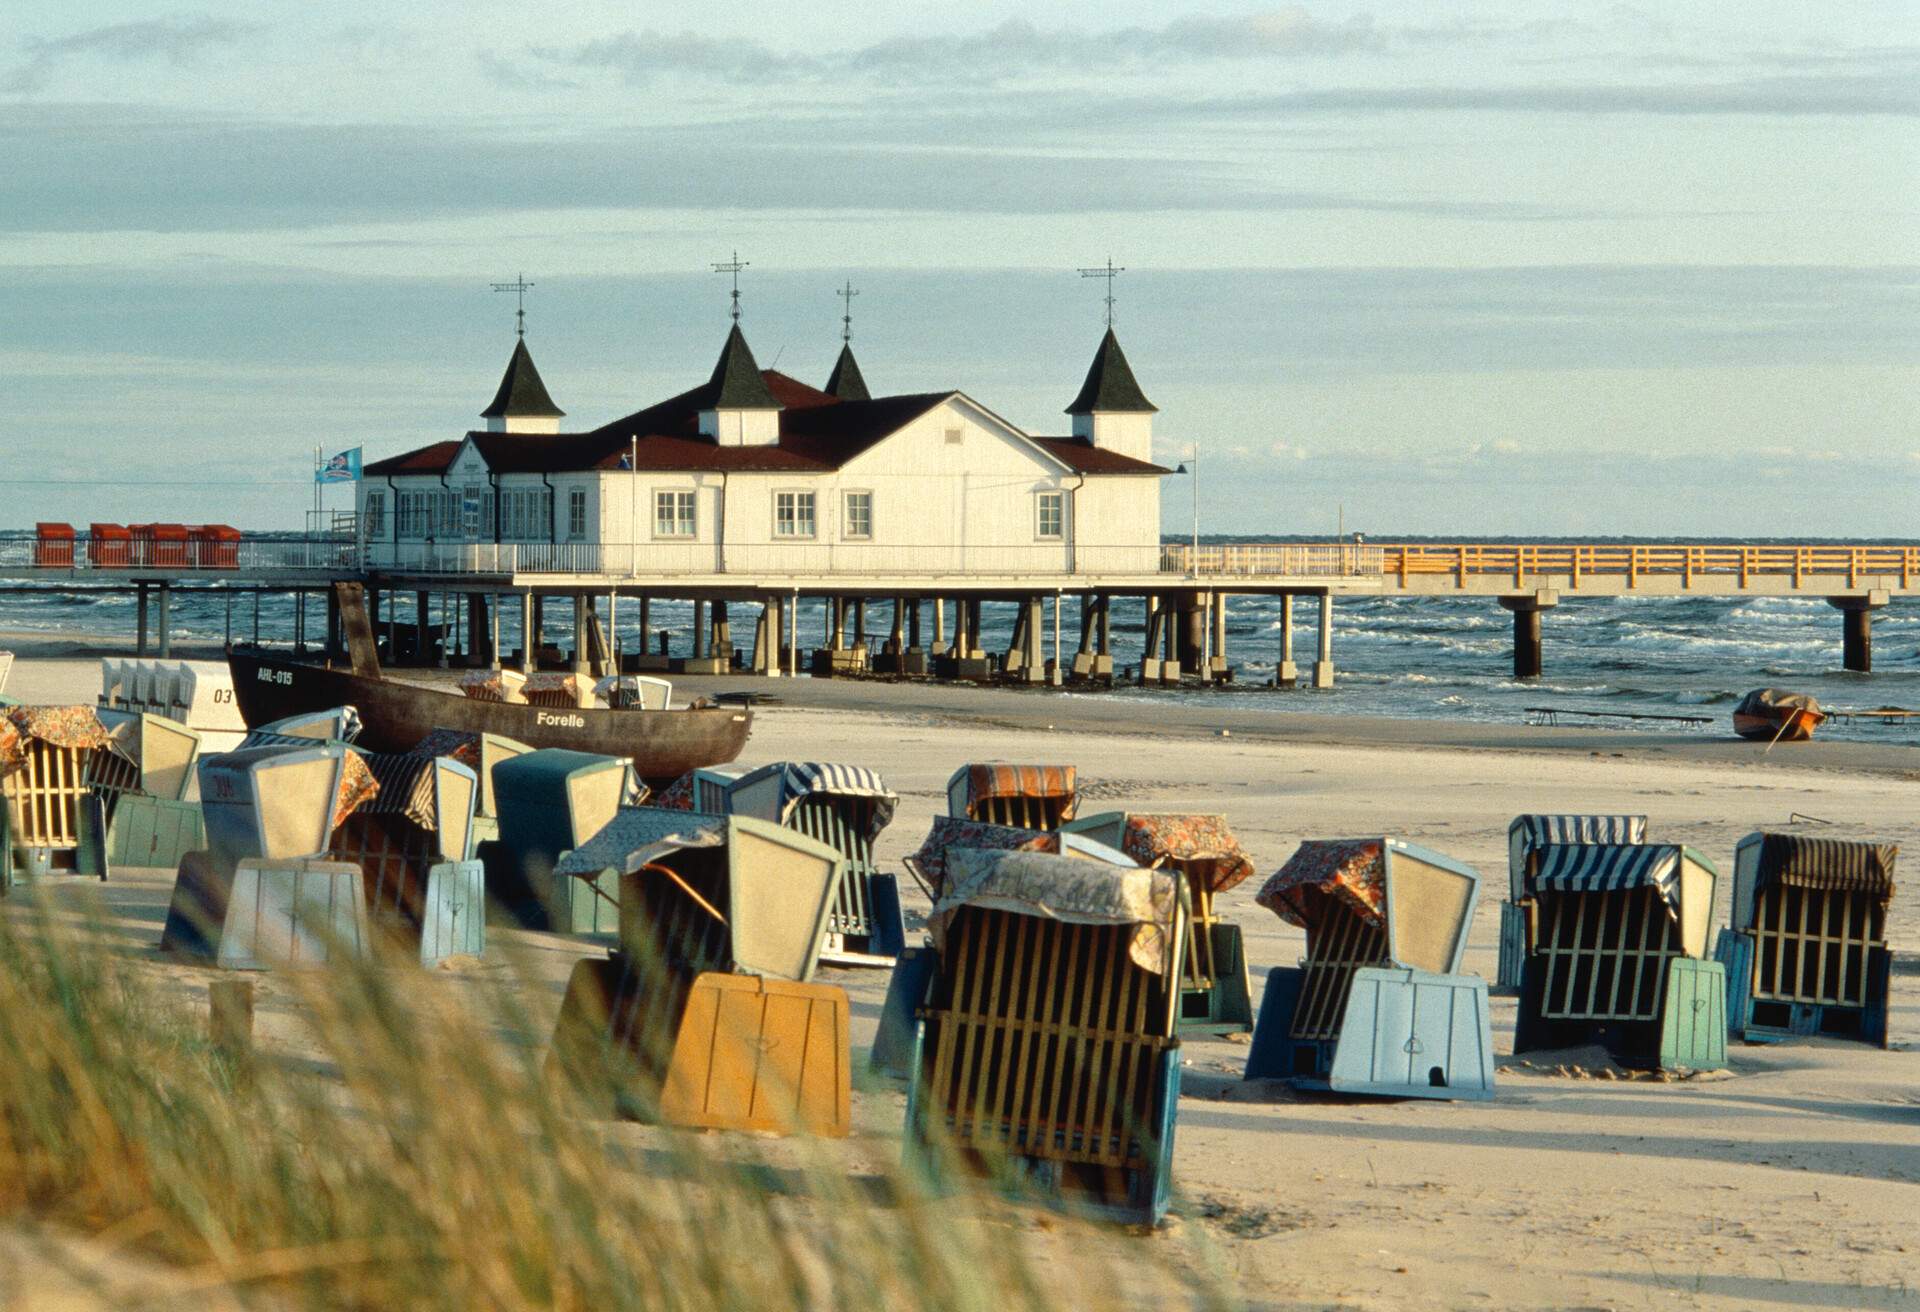 DEST_GERMANY_USEDOM_GettyImages-528807344